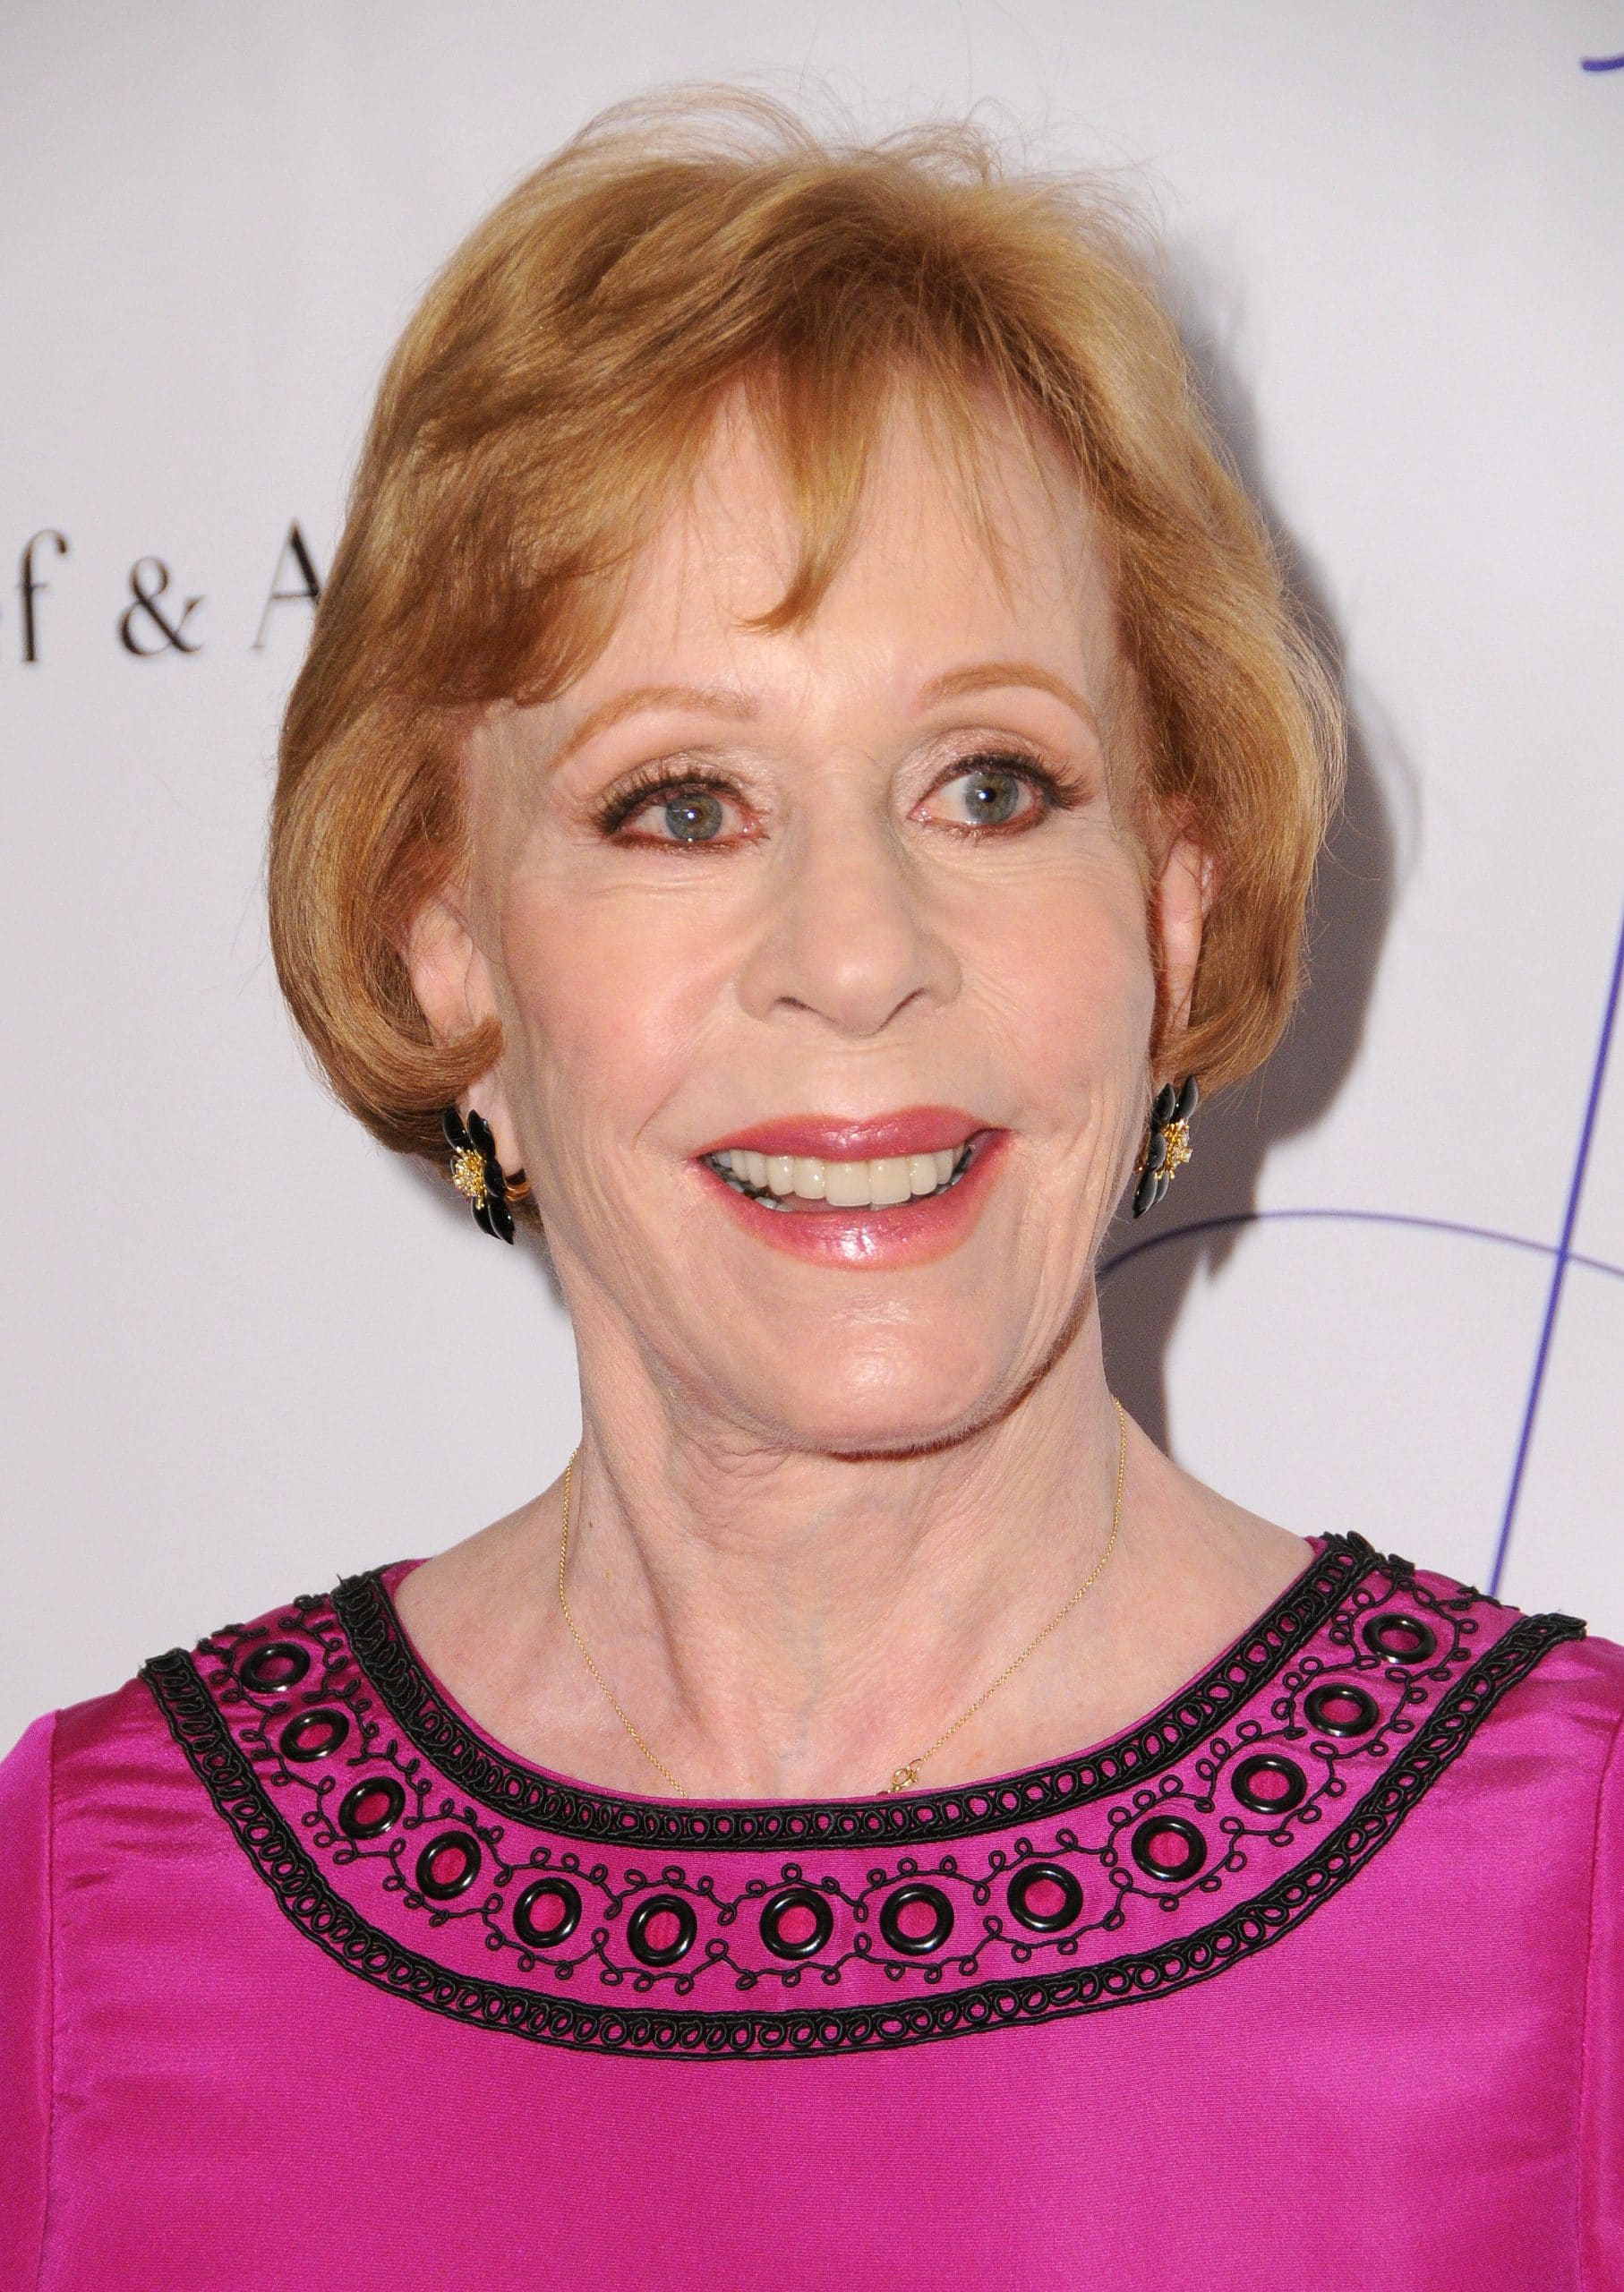 Carol Burnett Gains Temporary Guardianship Of Grandson Amid Daughter's Substance Abuse Issues